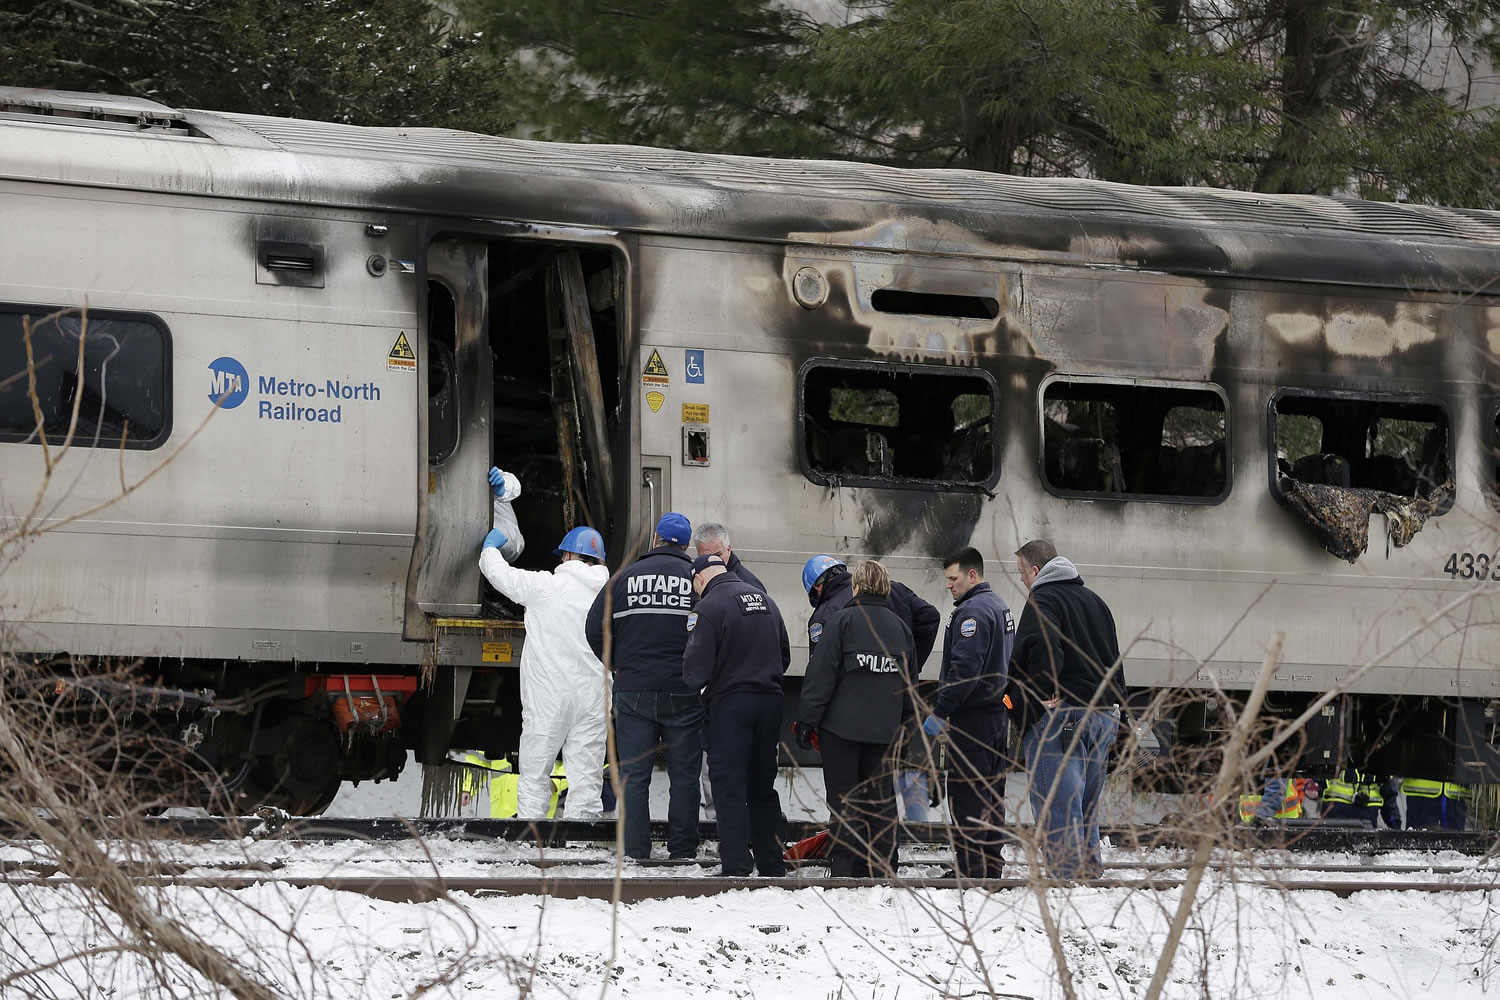 Emergency personnel look over the site of a collision between a Metro-North Railroad train and an SUV in Valhalla, N.Y., on Wednesday.